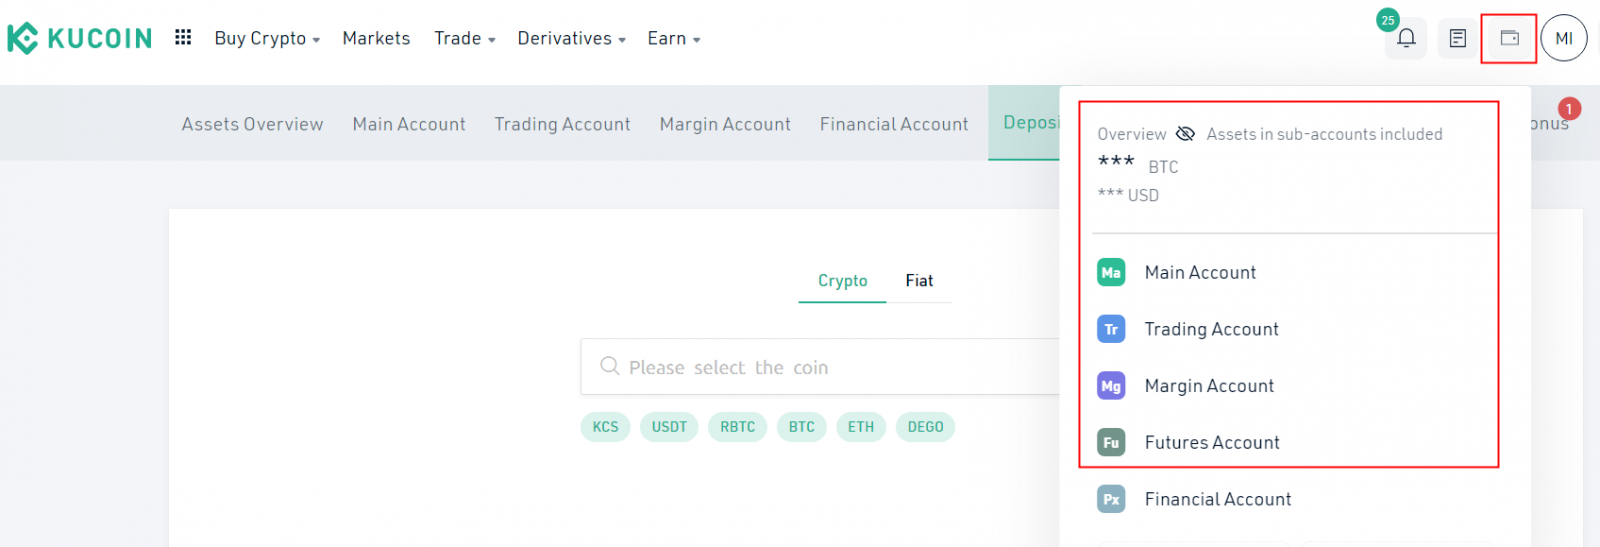 How to Login and Deposit in KuCoin